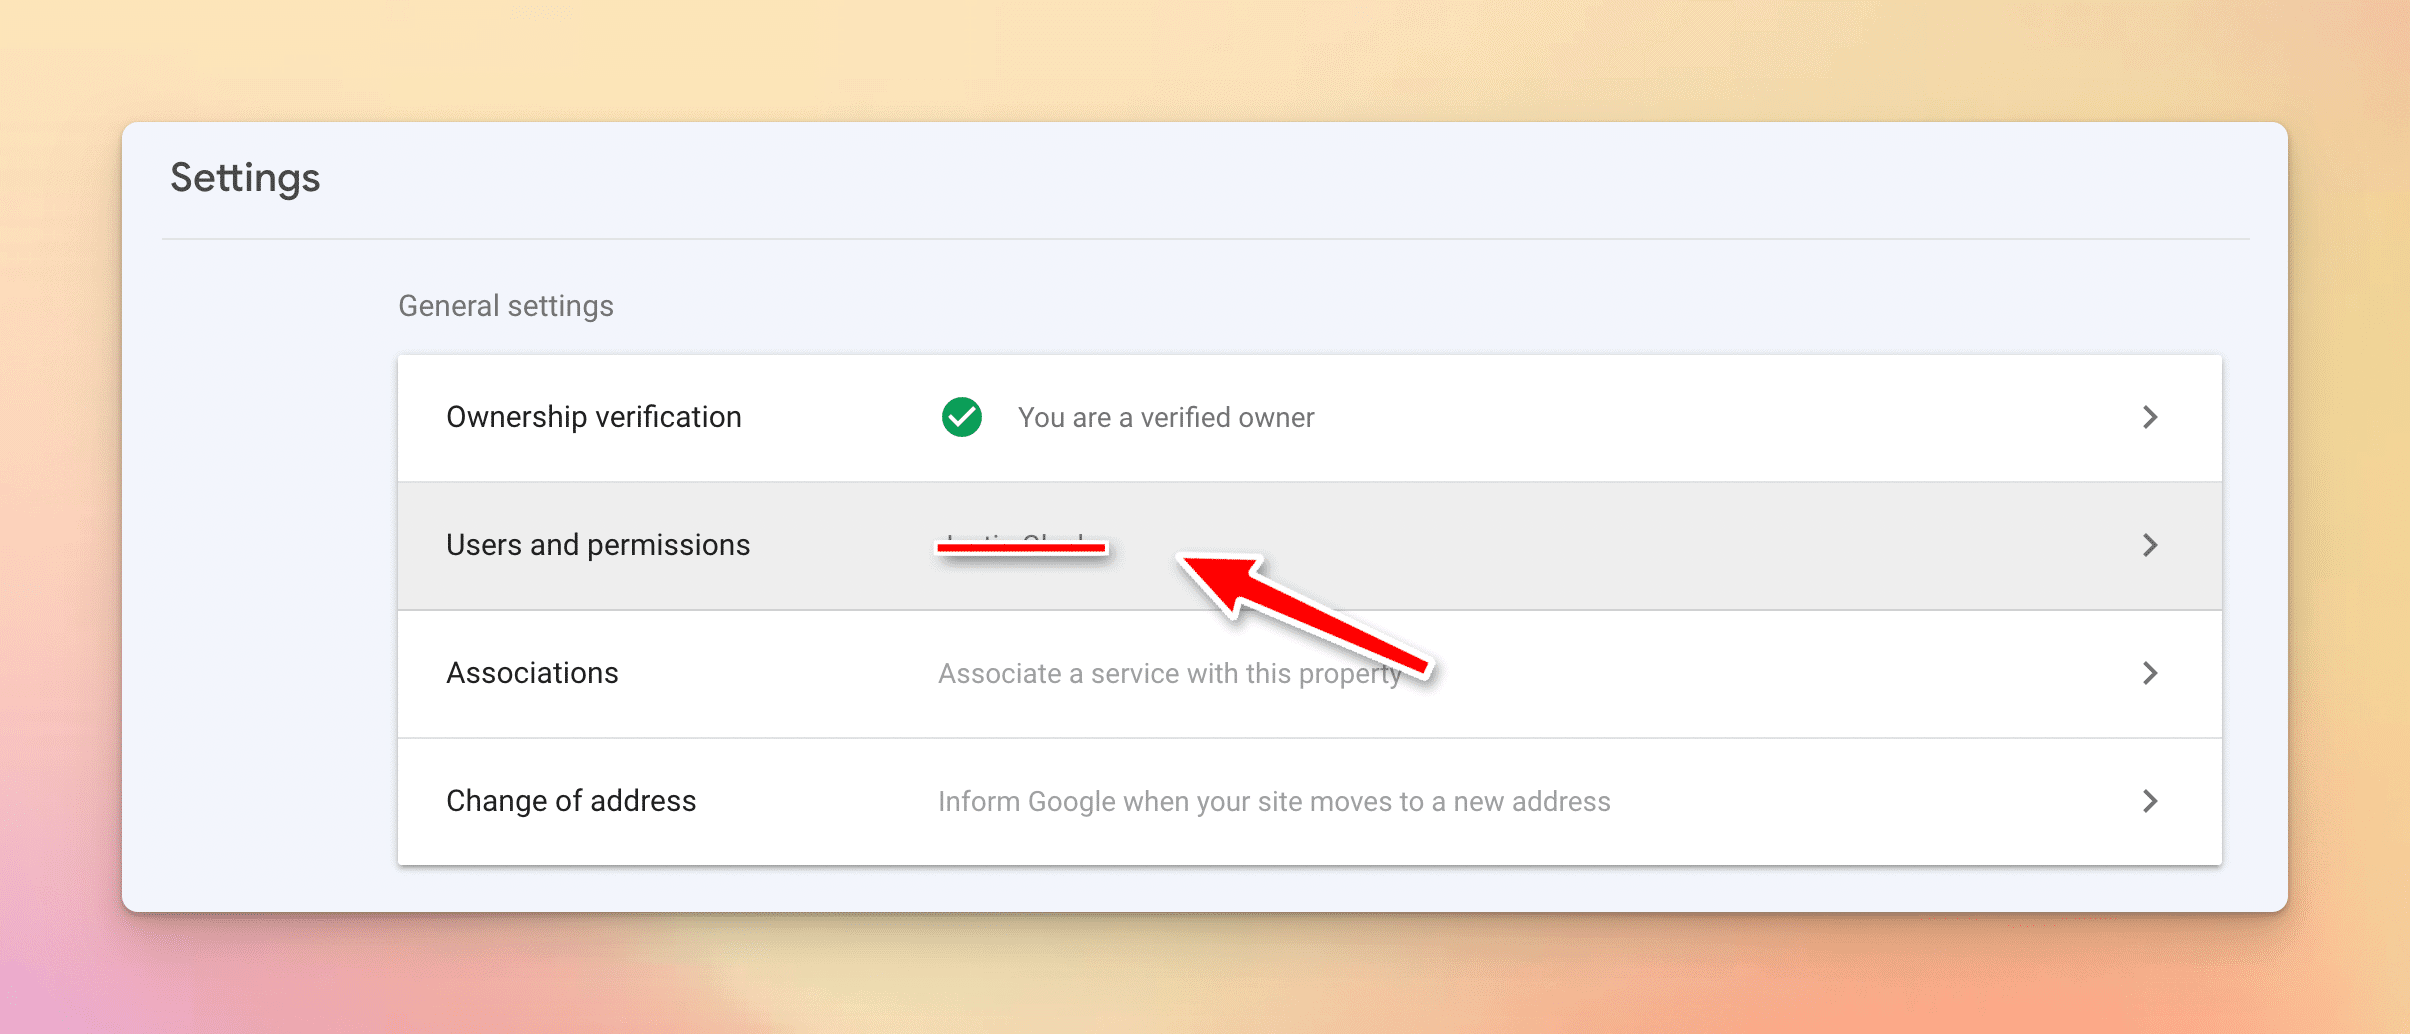 Verified owner users & permissions page in Google Search Console